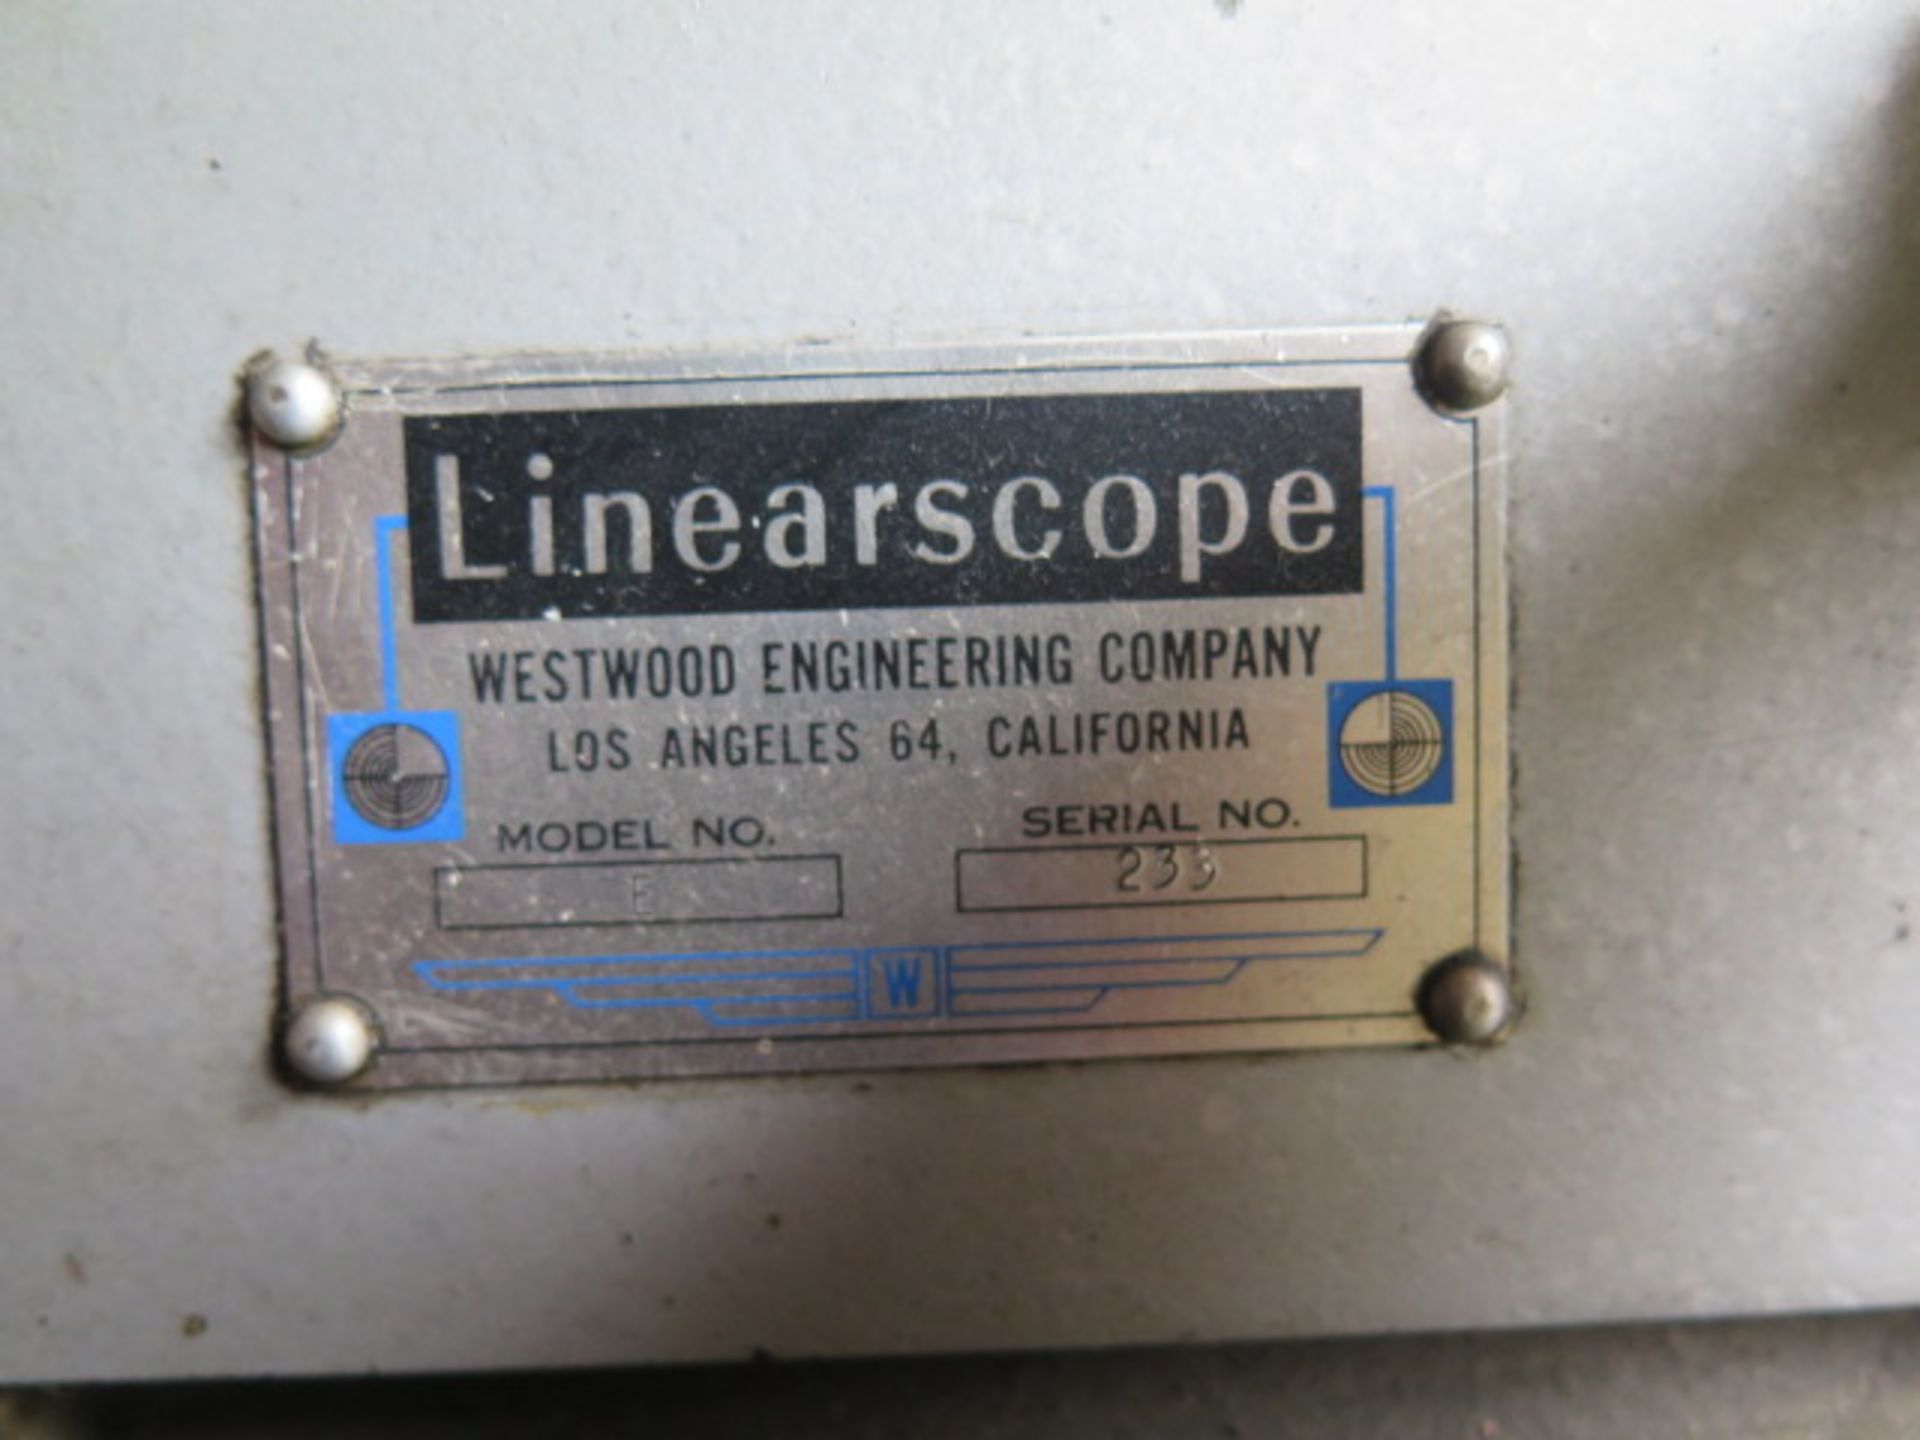 Westwood Eng. mdl. E “Linearscope” Toolmakers Microscope s/n 233 w/ 6” x 20” Table - Image 3 of 3